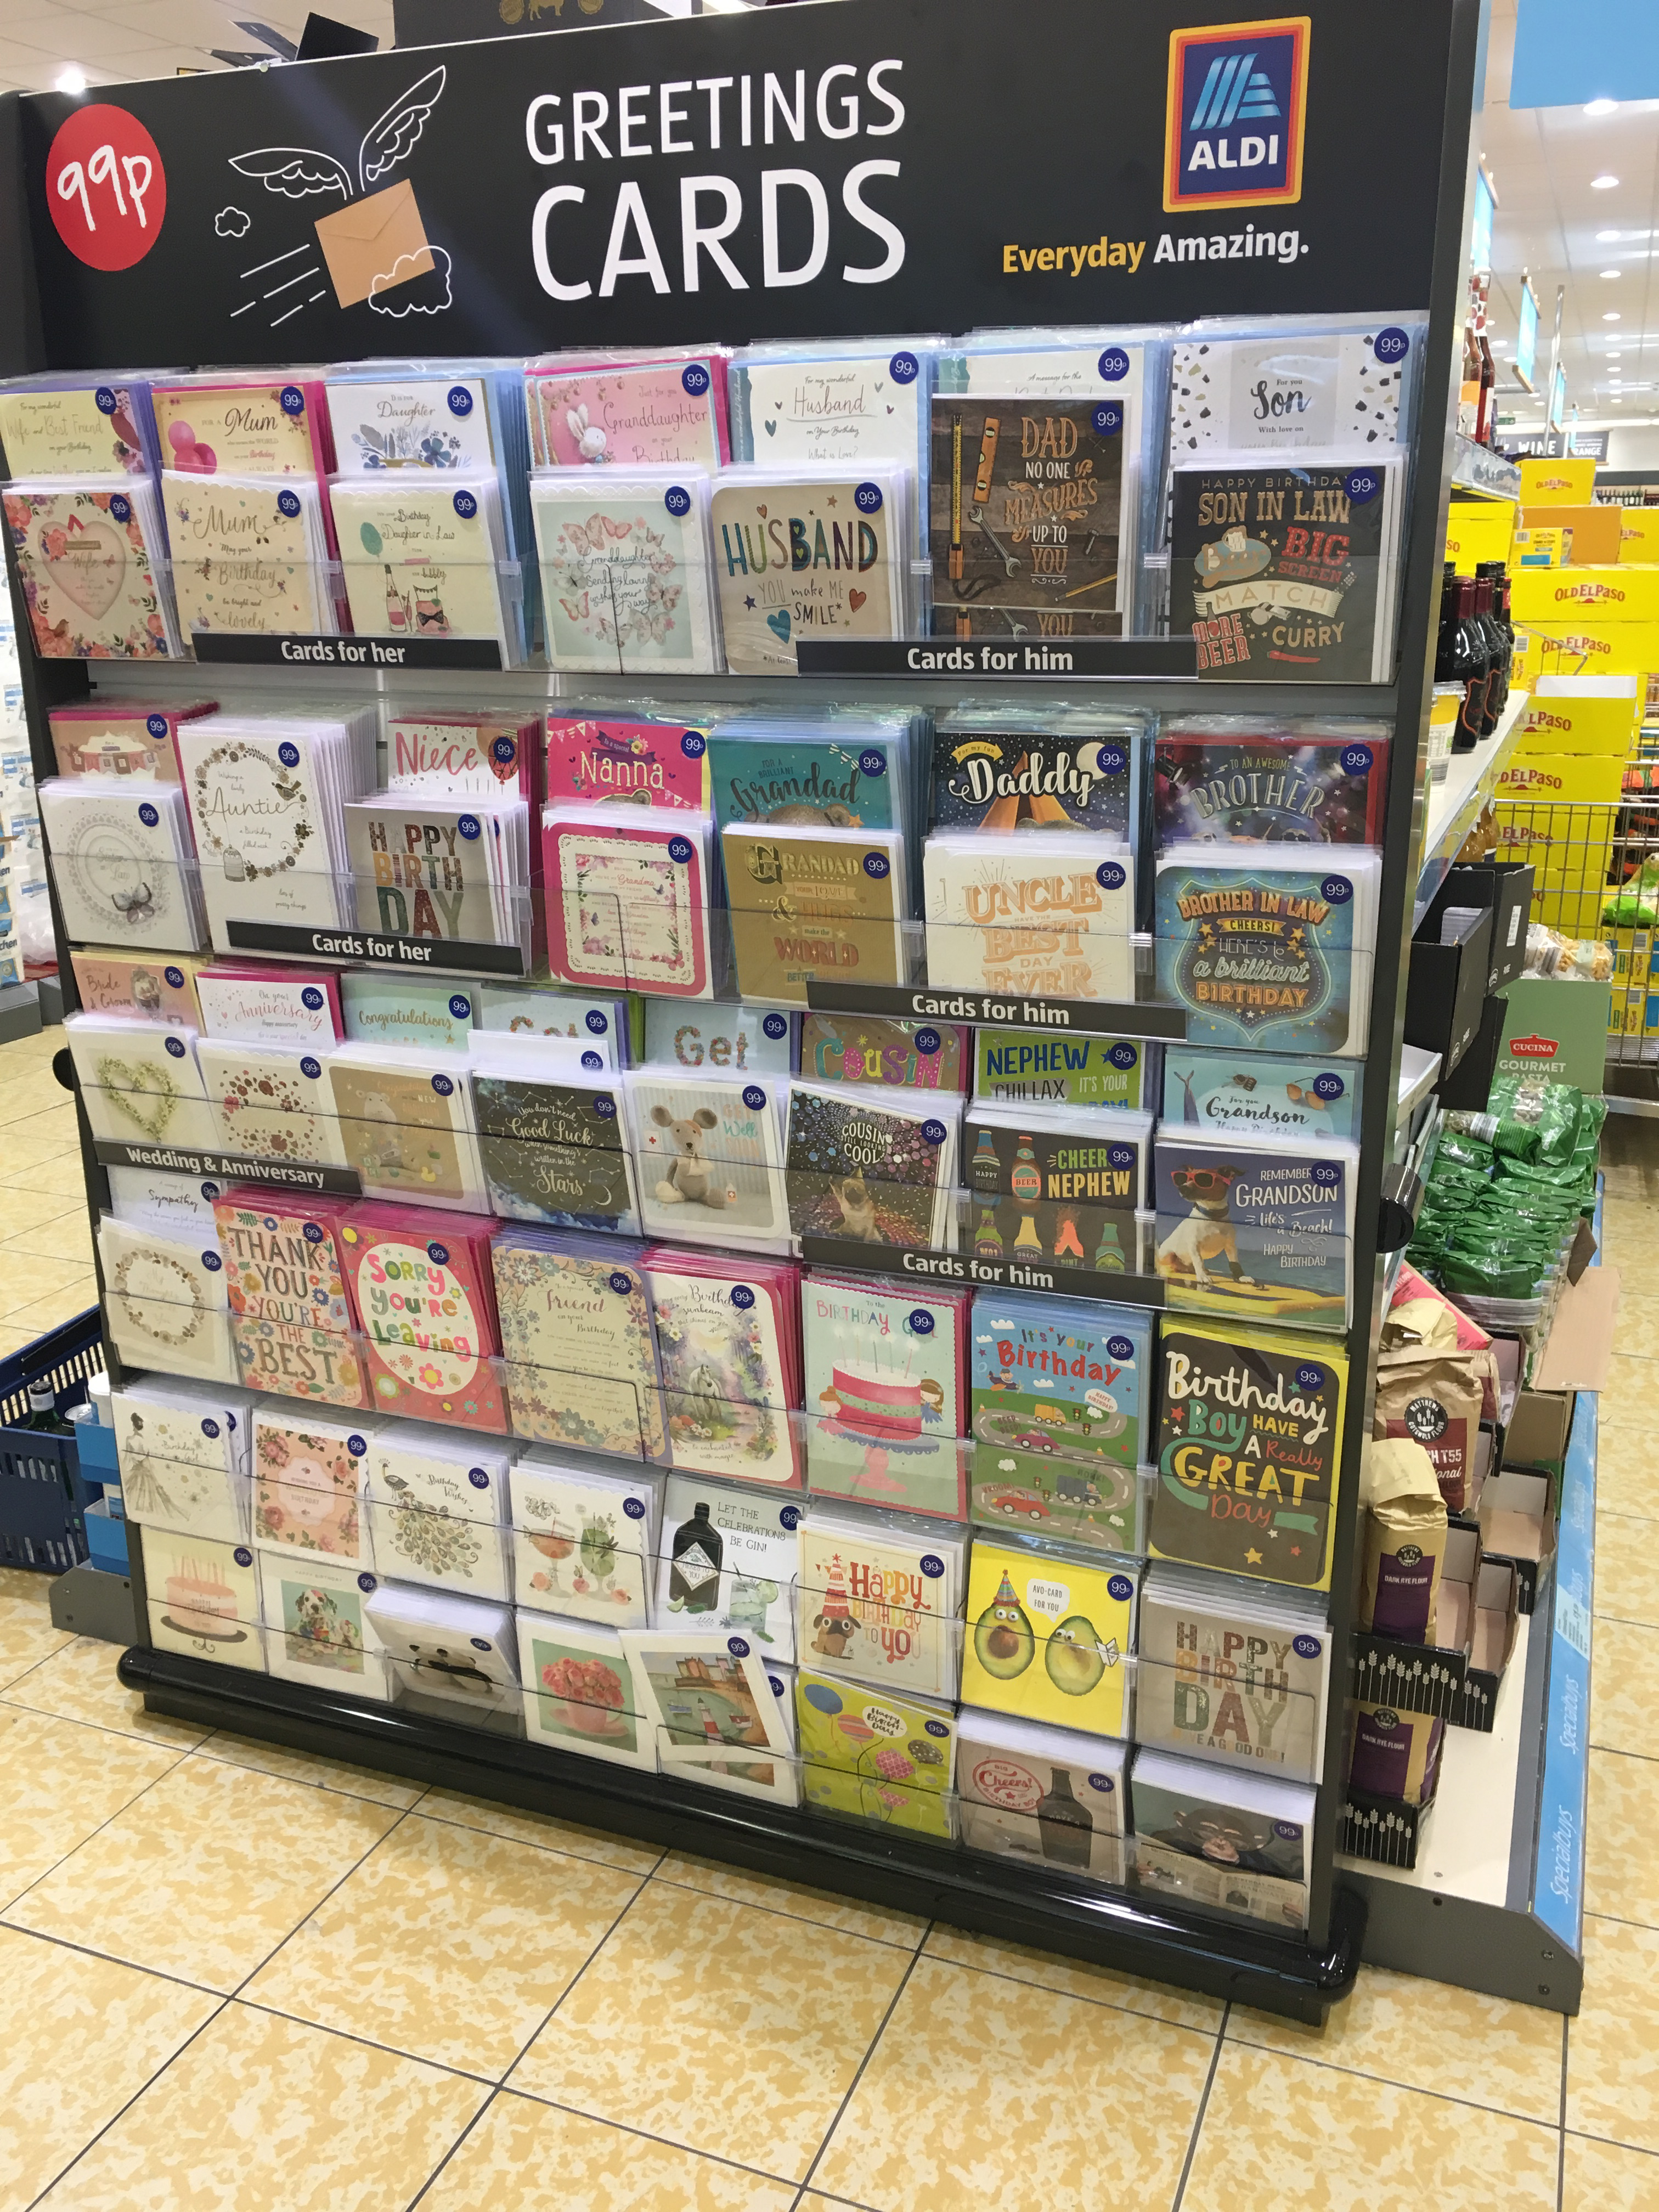 Above: One of the displays of Card Factory cards in Aldi.  